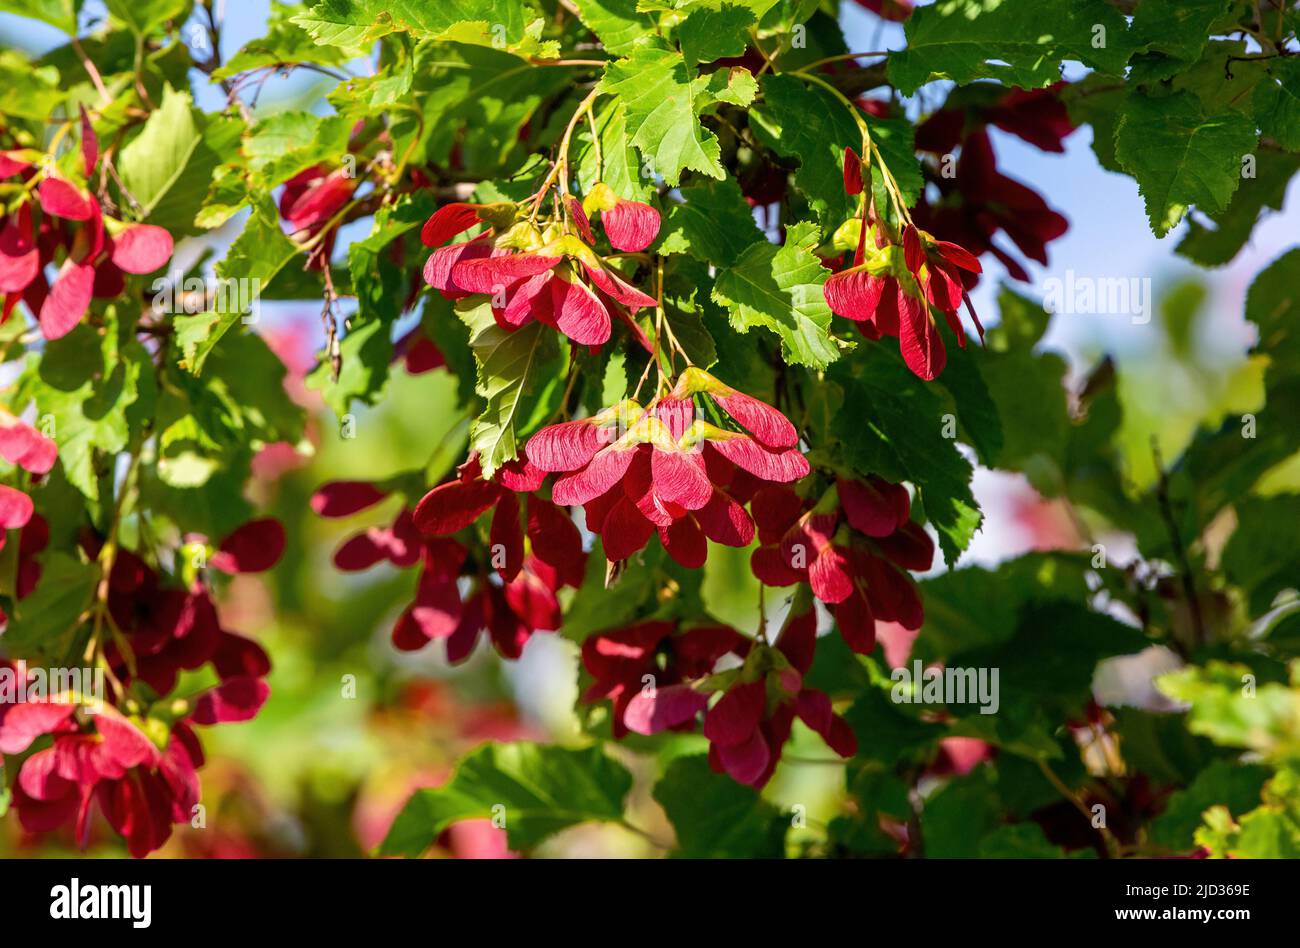 A Tatarian Maple Tree called Hot Wings with clusters of red samaras or seed pods hanging from it in Summertime. Stock Photo